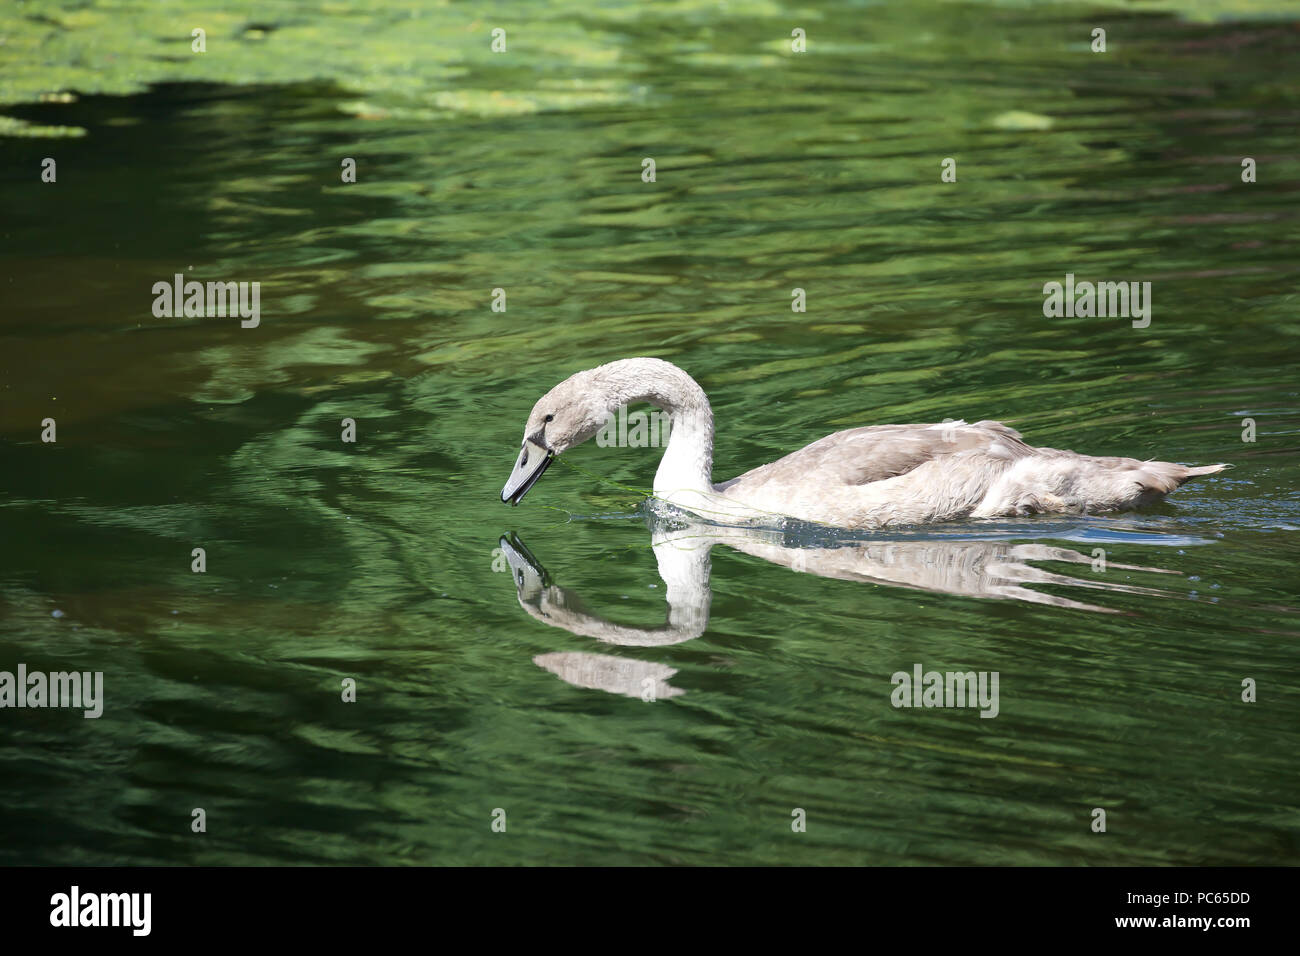 London,UK,31st July 2018,A swan in  Green Park Central London©Keith Larby/Alamy Live News Stock Photo